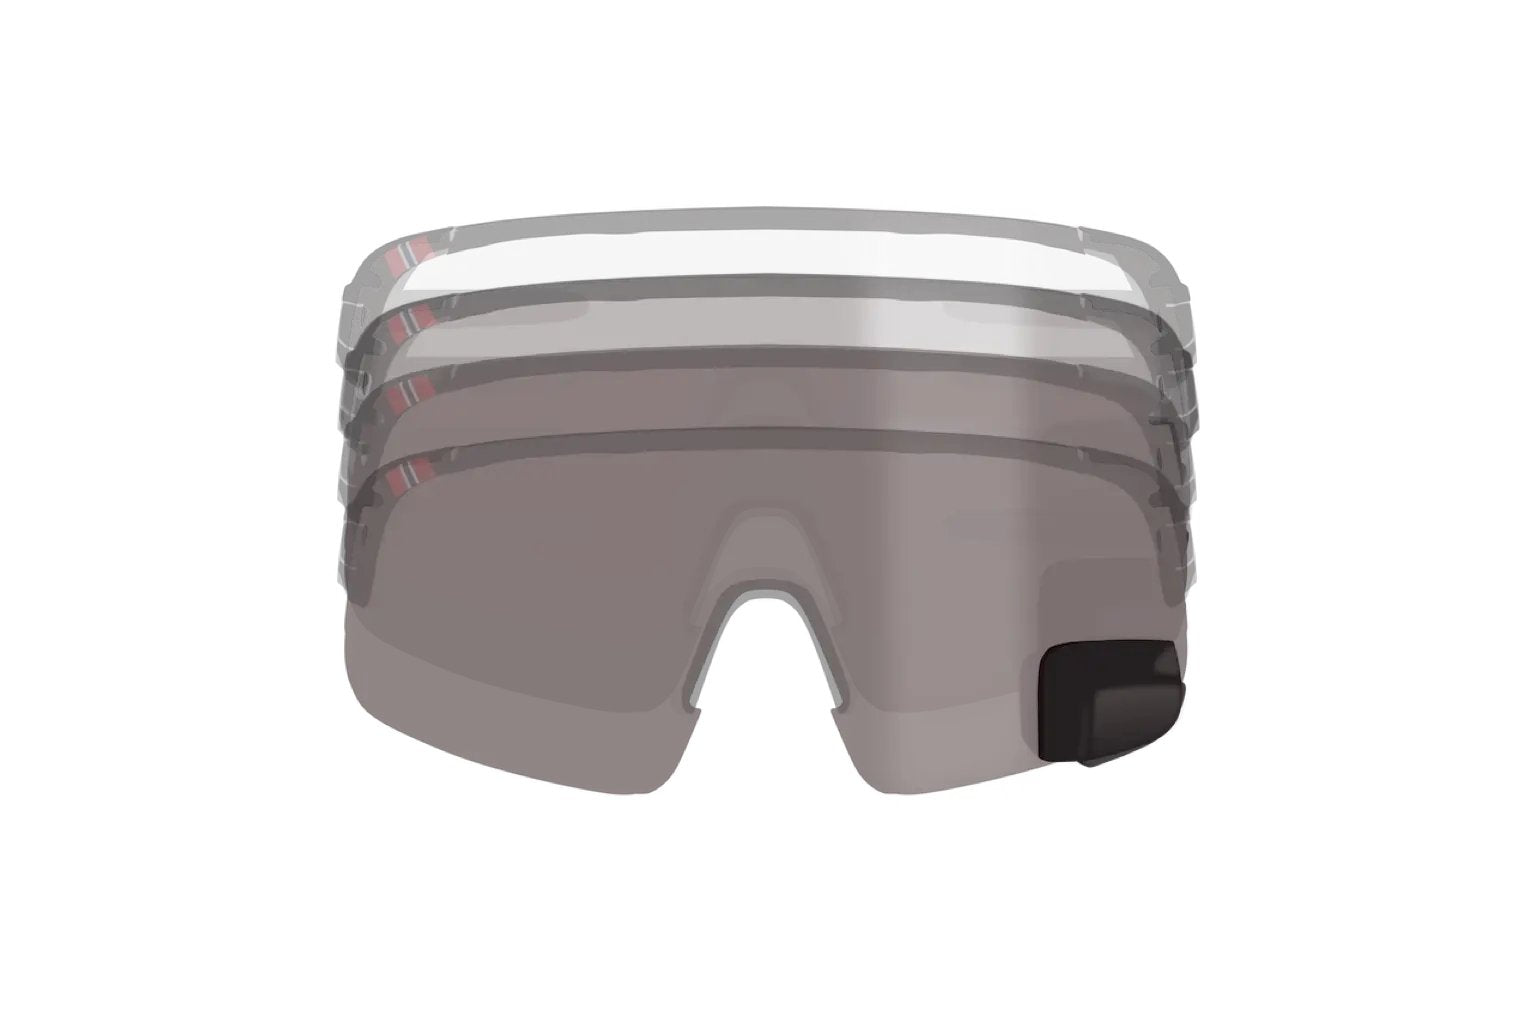 View Sport - Revo Max Cycling Glasses with Mirror - TriEye Small / Left (US and Europe) / Black Revo Red